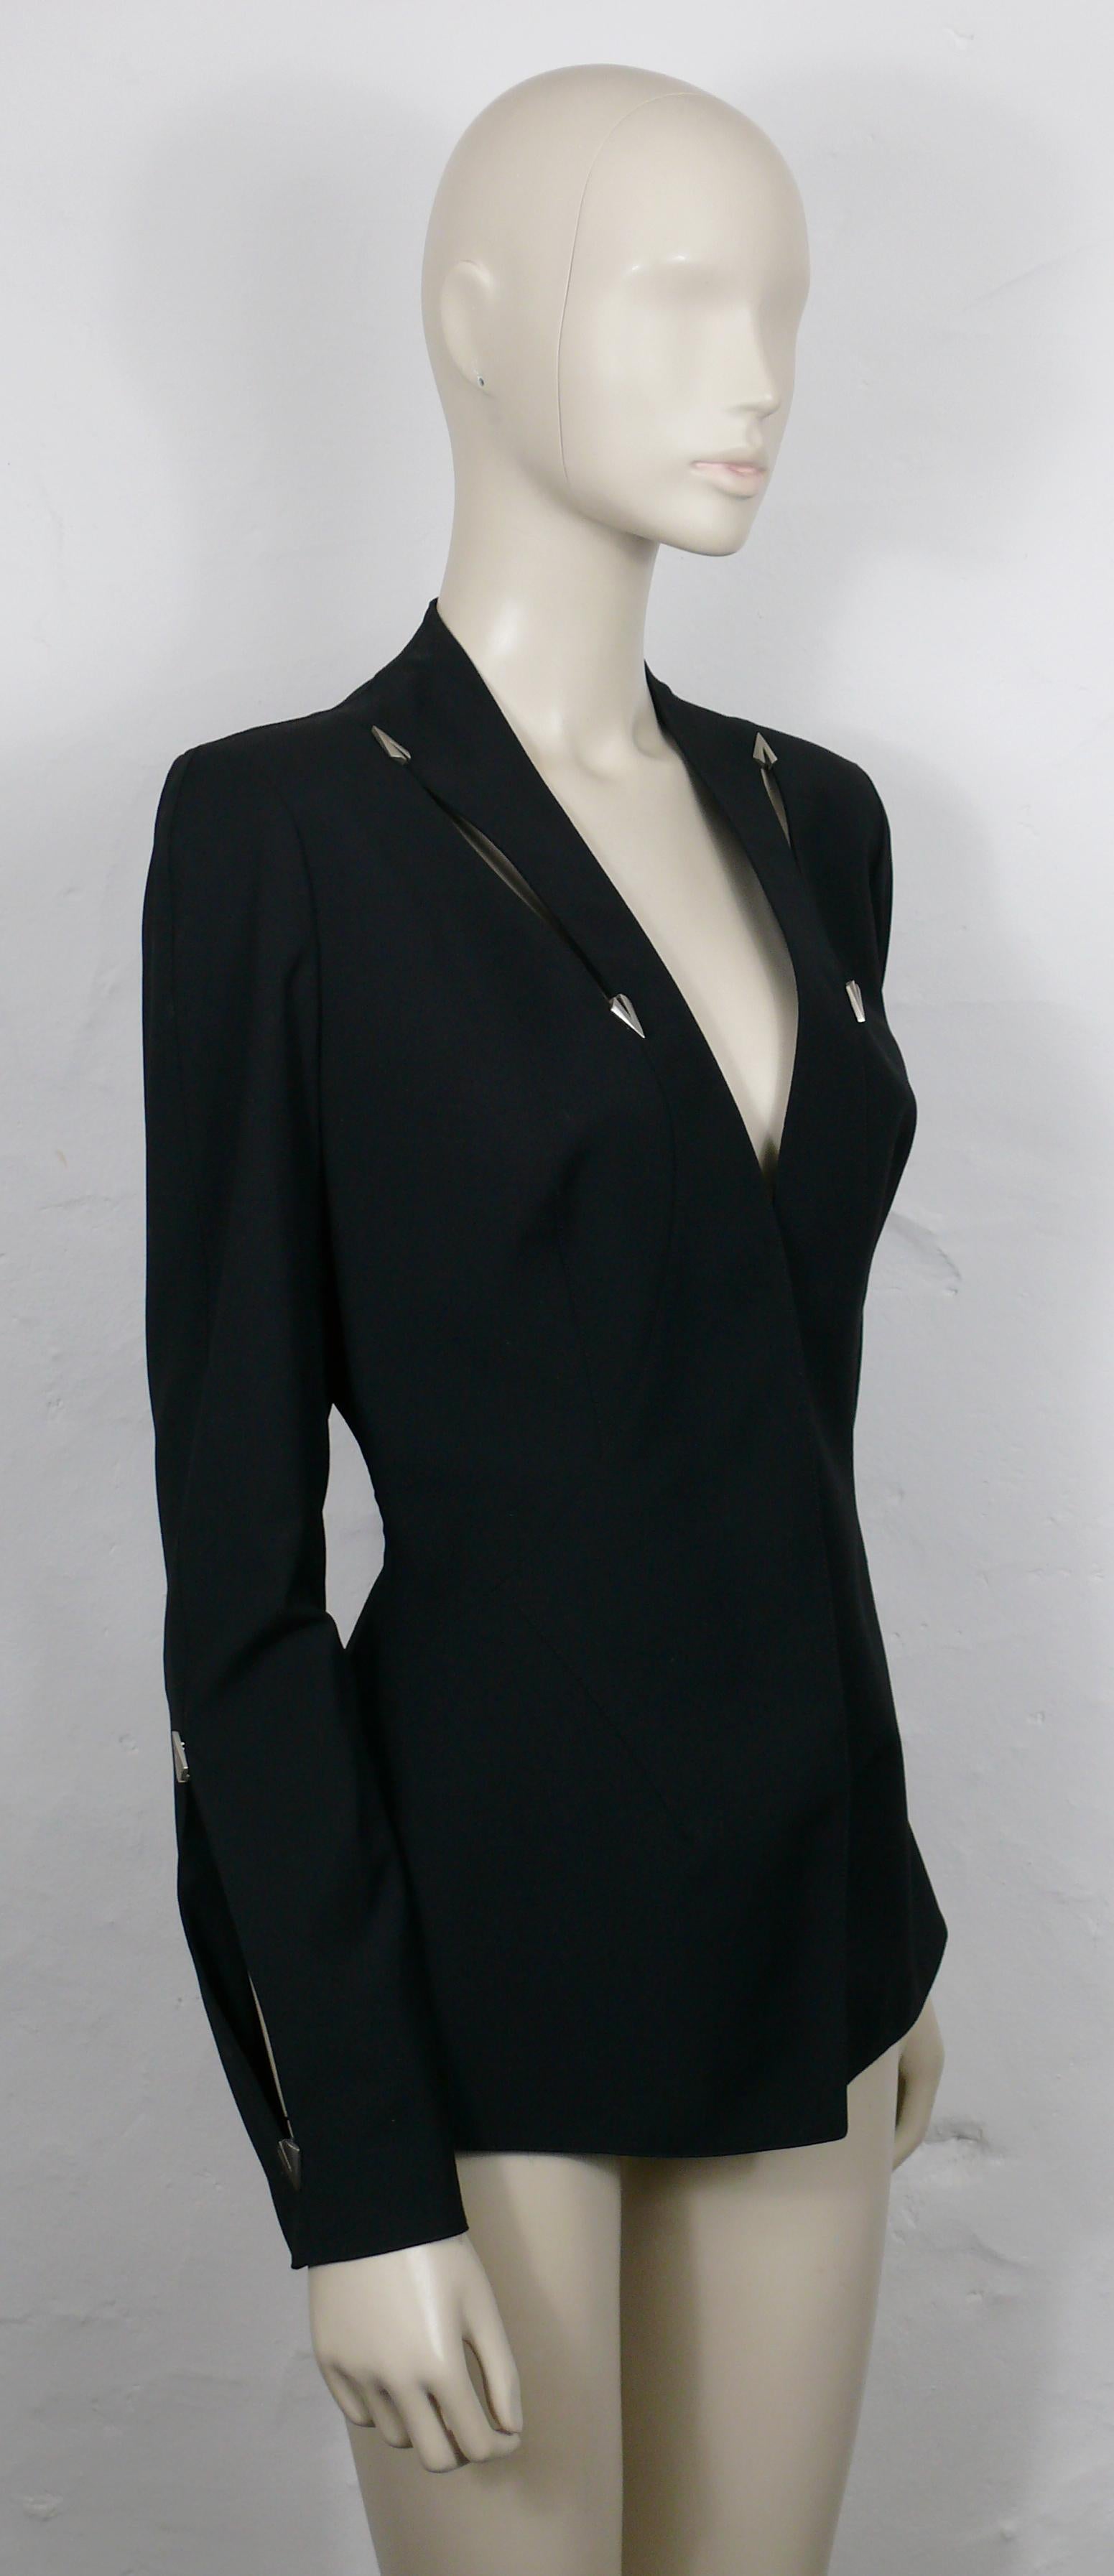 THIERRY MUGLER Couture vintage spring/summer black supple jacket featuring cut-outs on front, forearms and back embellished with brushed silver tone arrowhead details.

This jacket is typical from THIERRY MUGLER's sculptural cut and